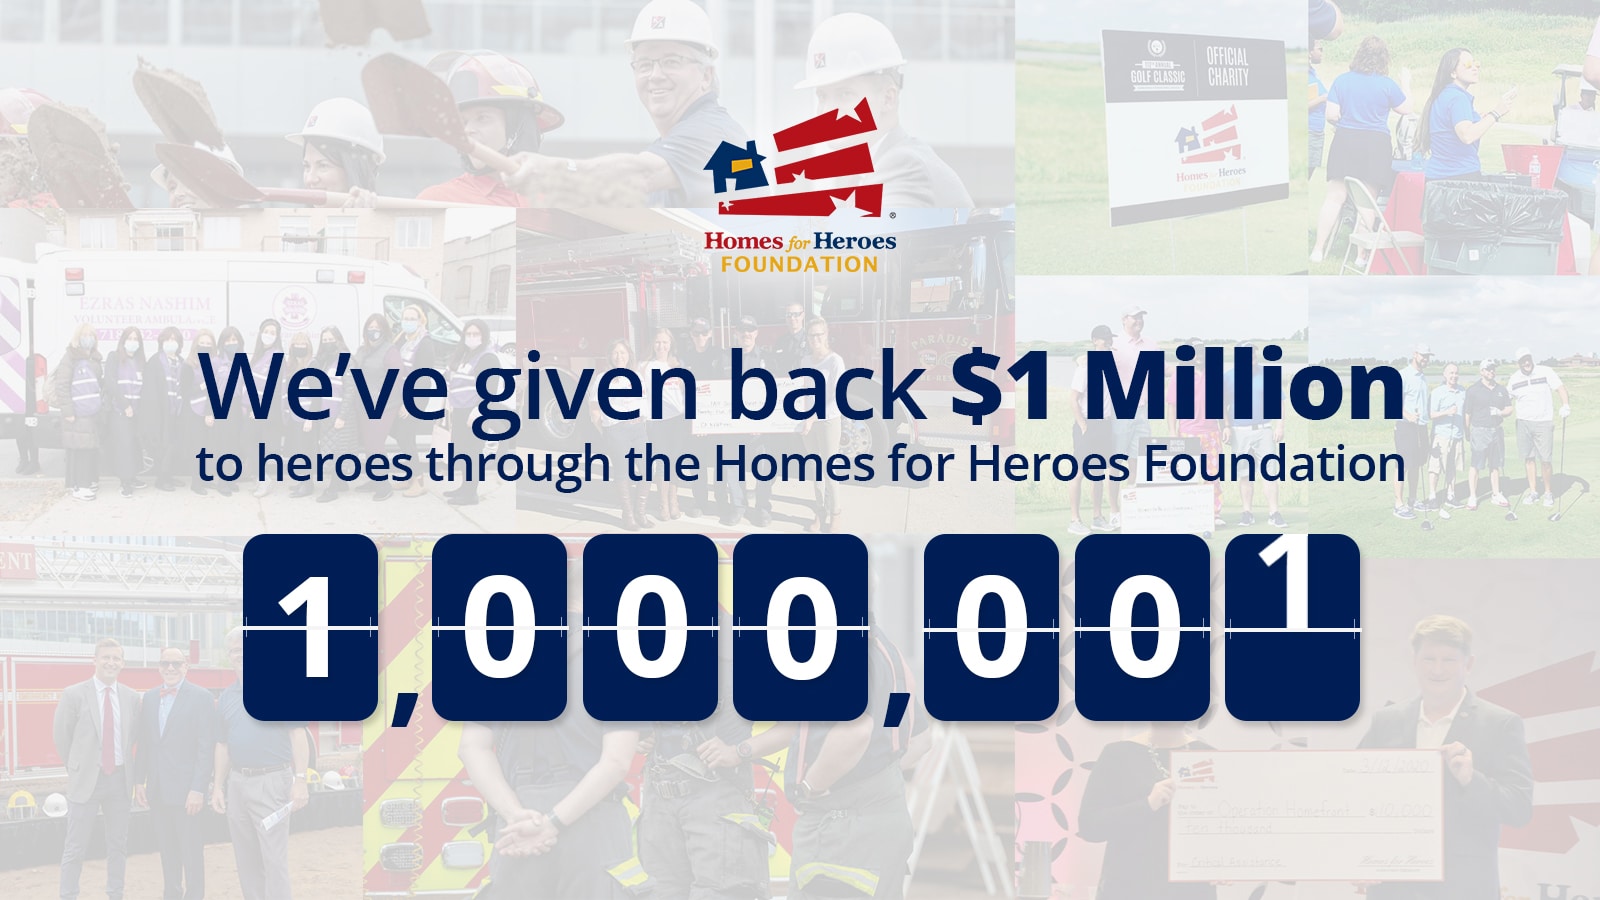 A ticker counter shows a count of one million while continuing to count up against a background of homes for heroes foundation's previous check presentations for grants given